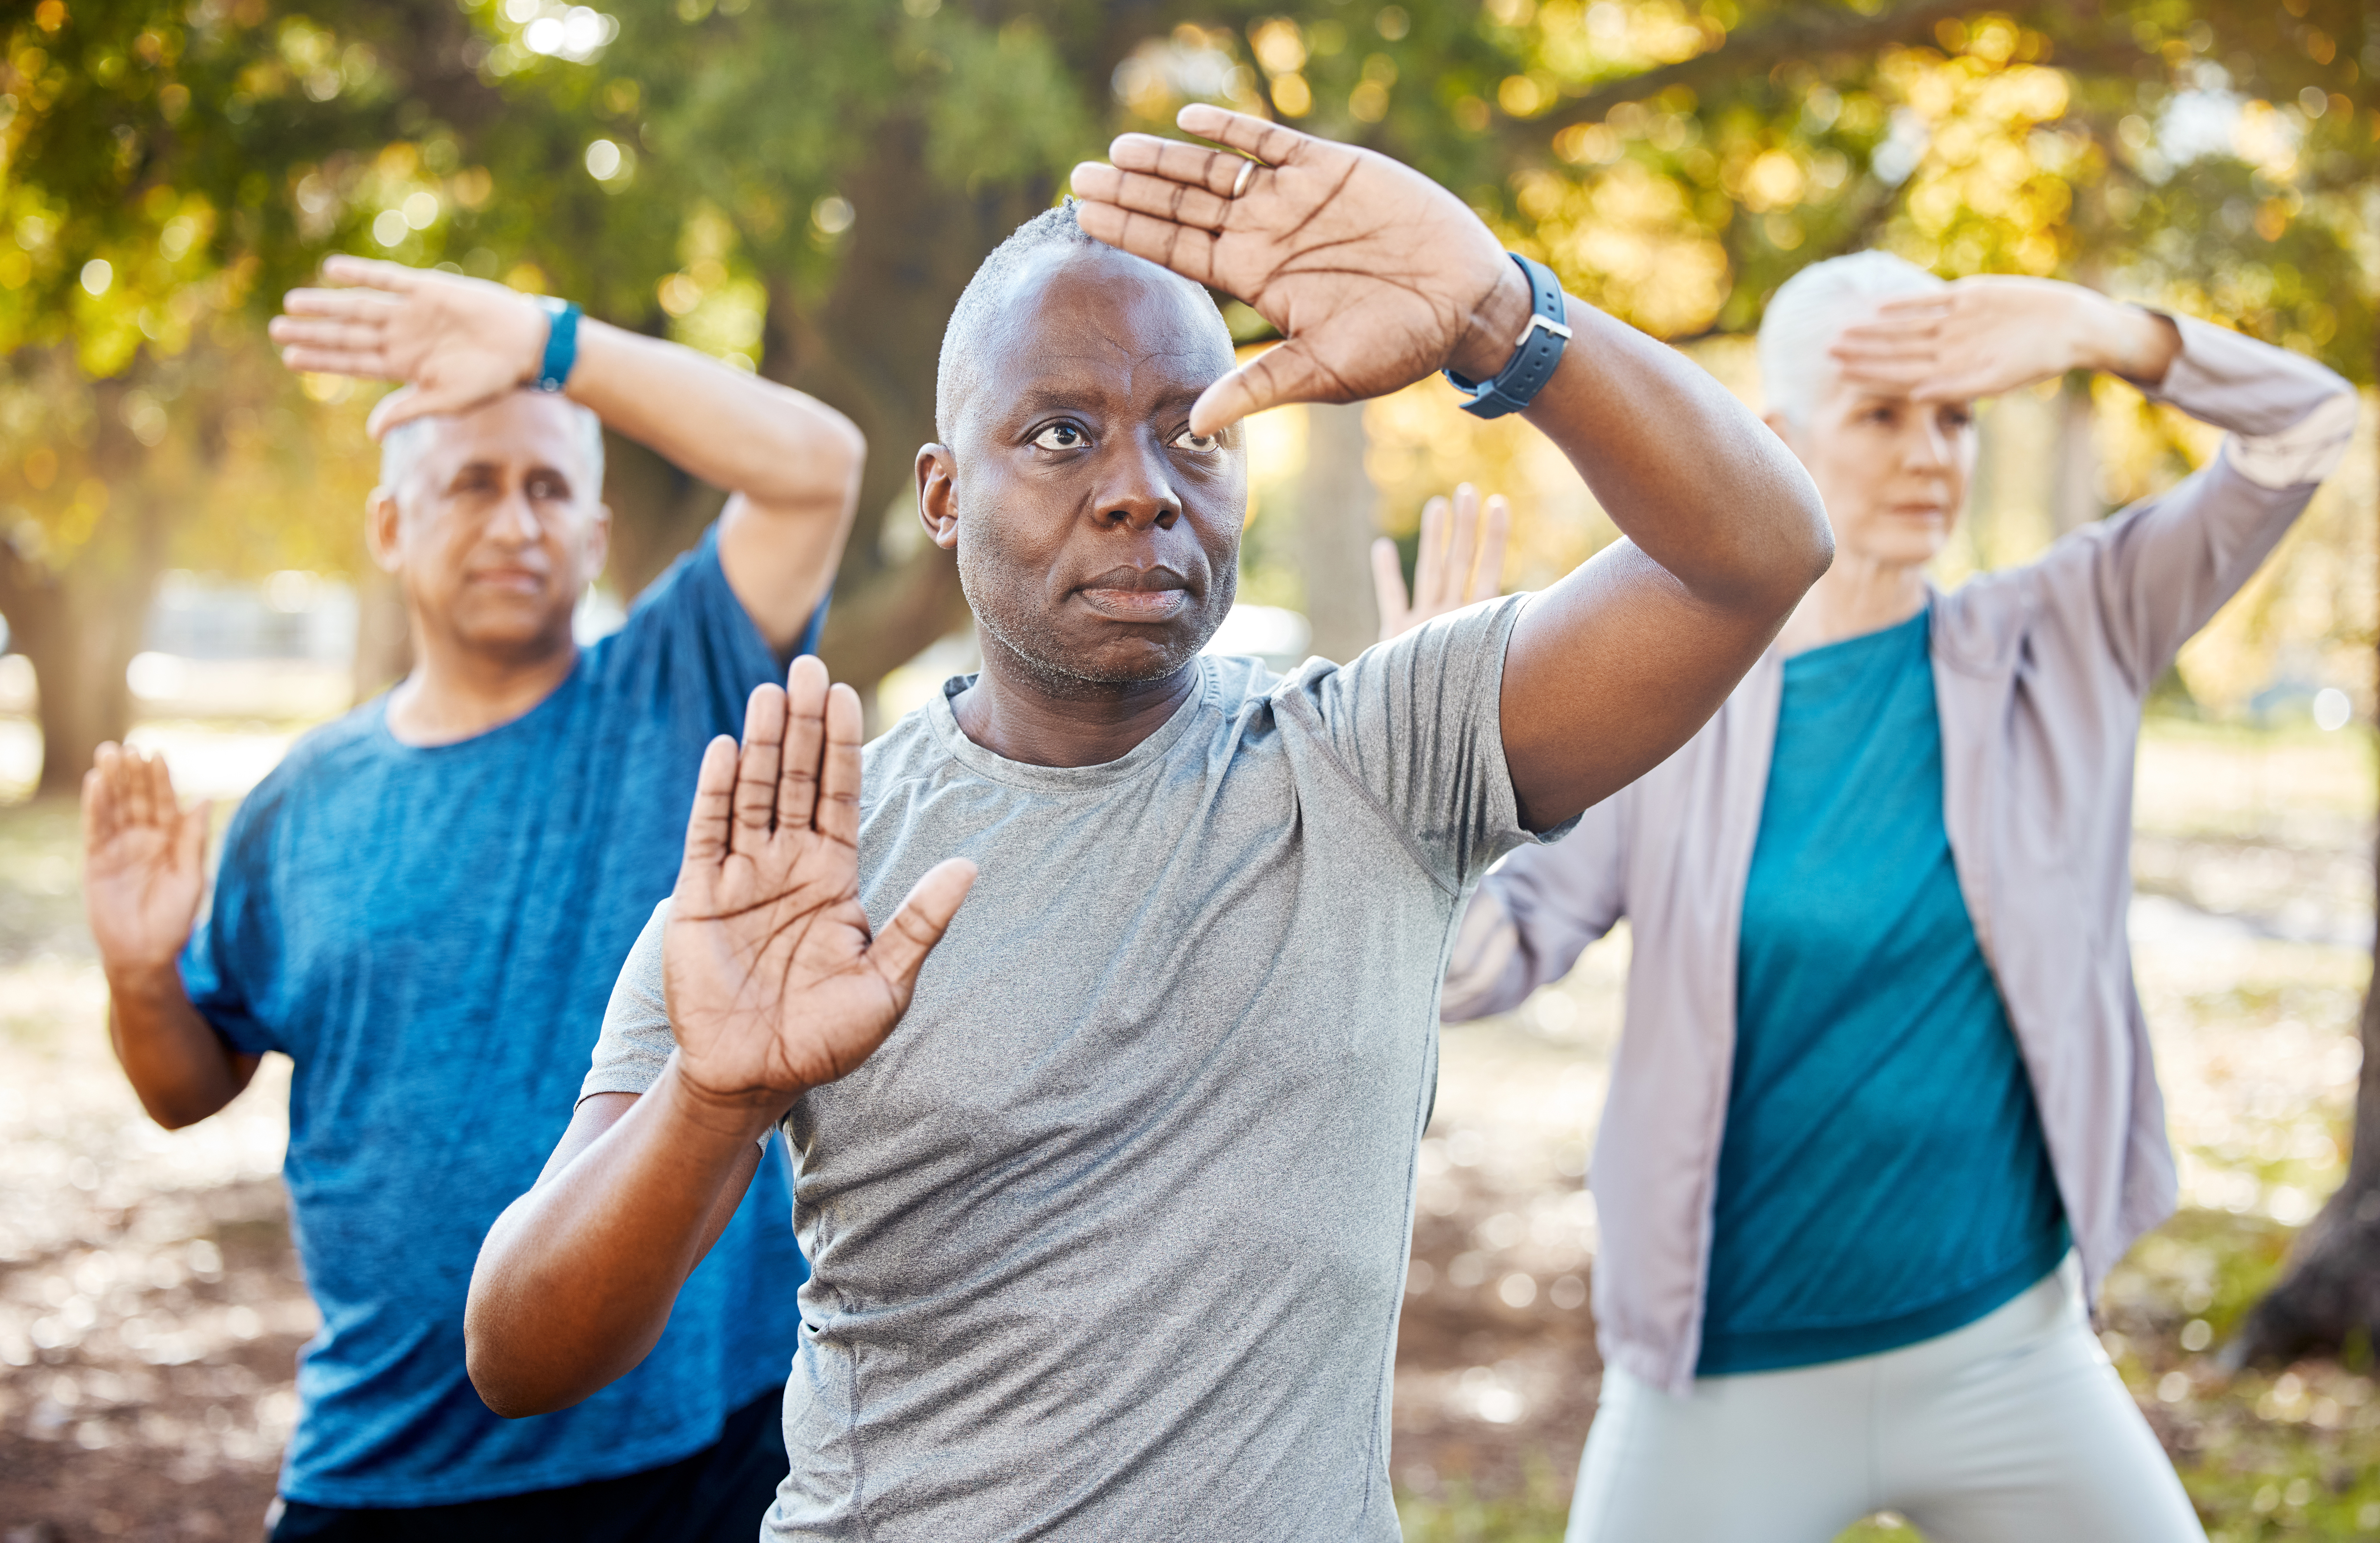 Exercises-for-Active-Seniors Fitness, tai chi